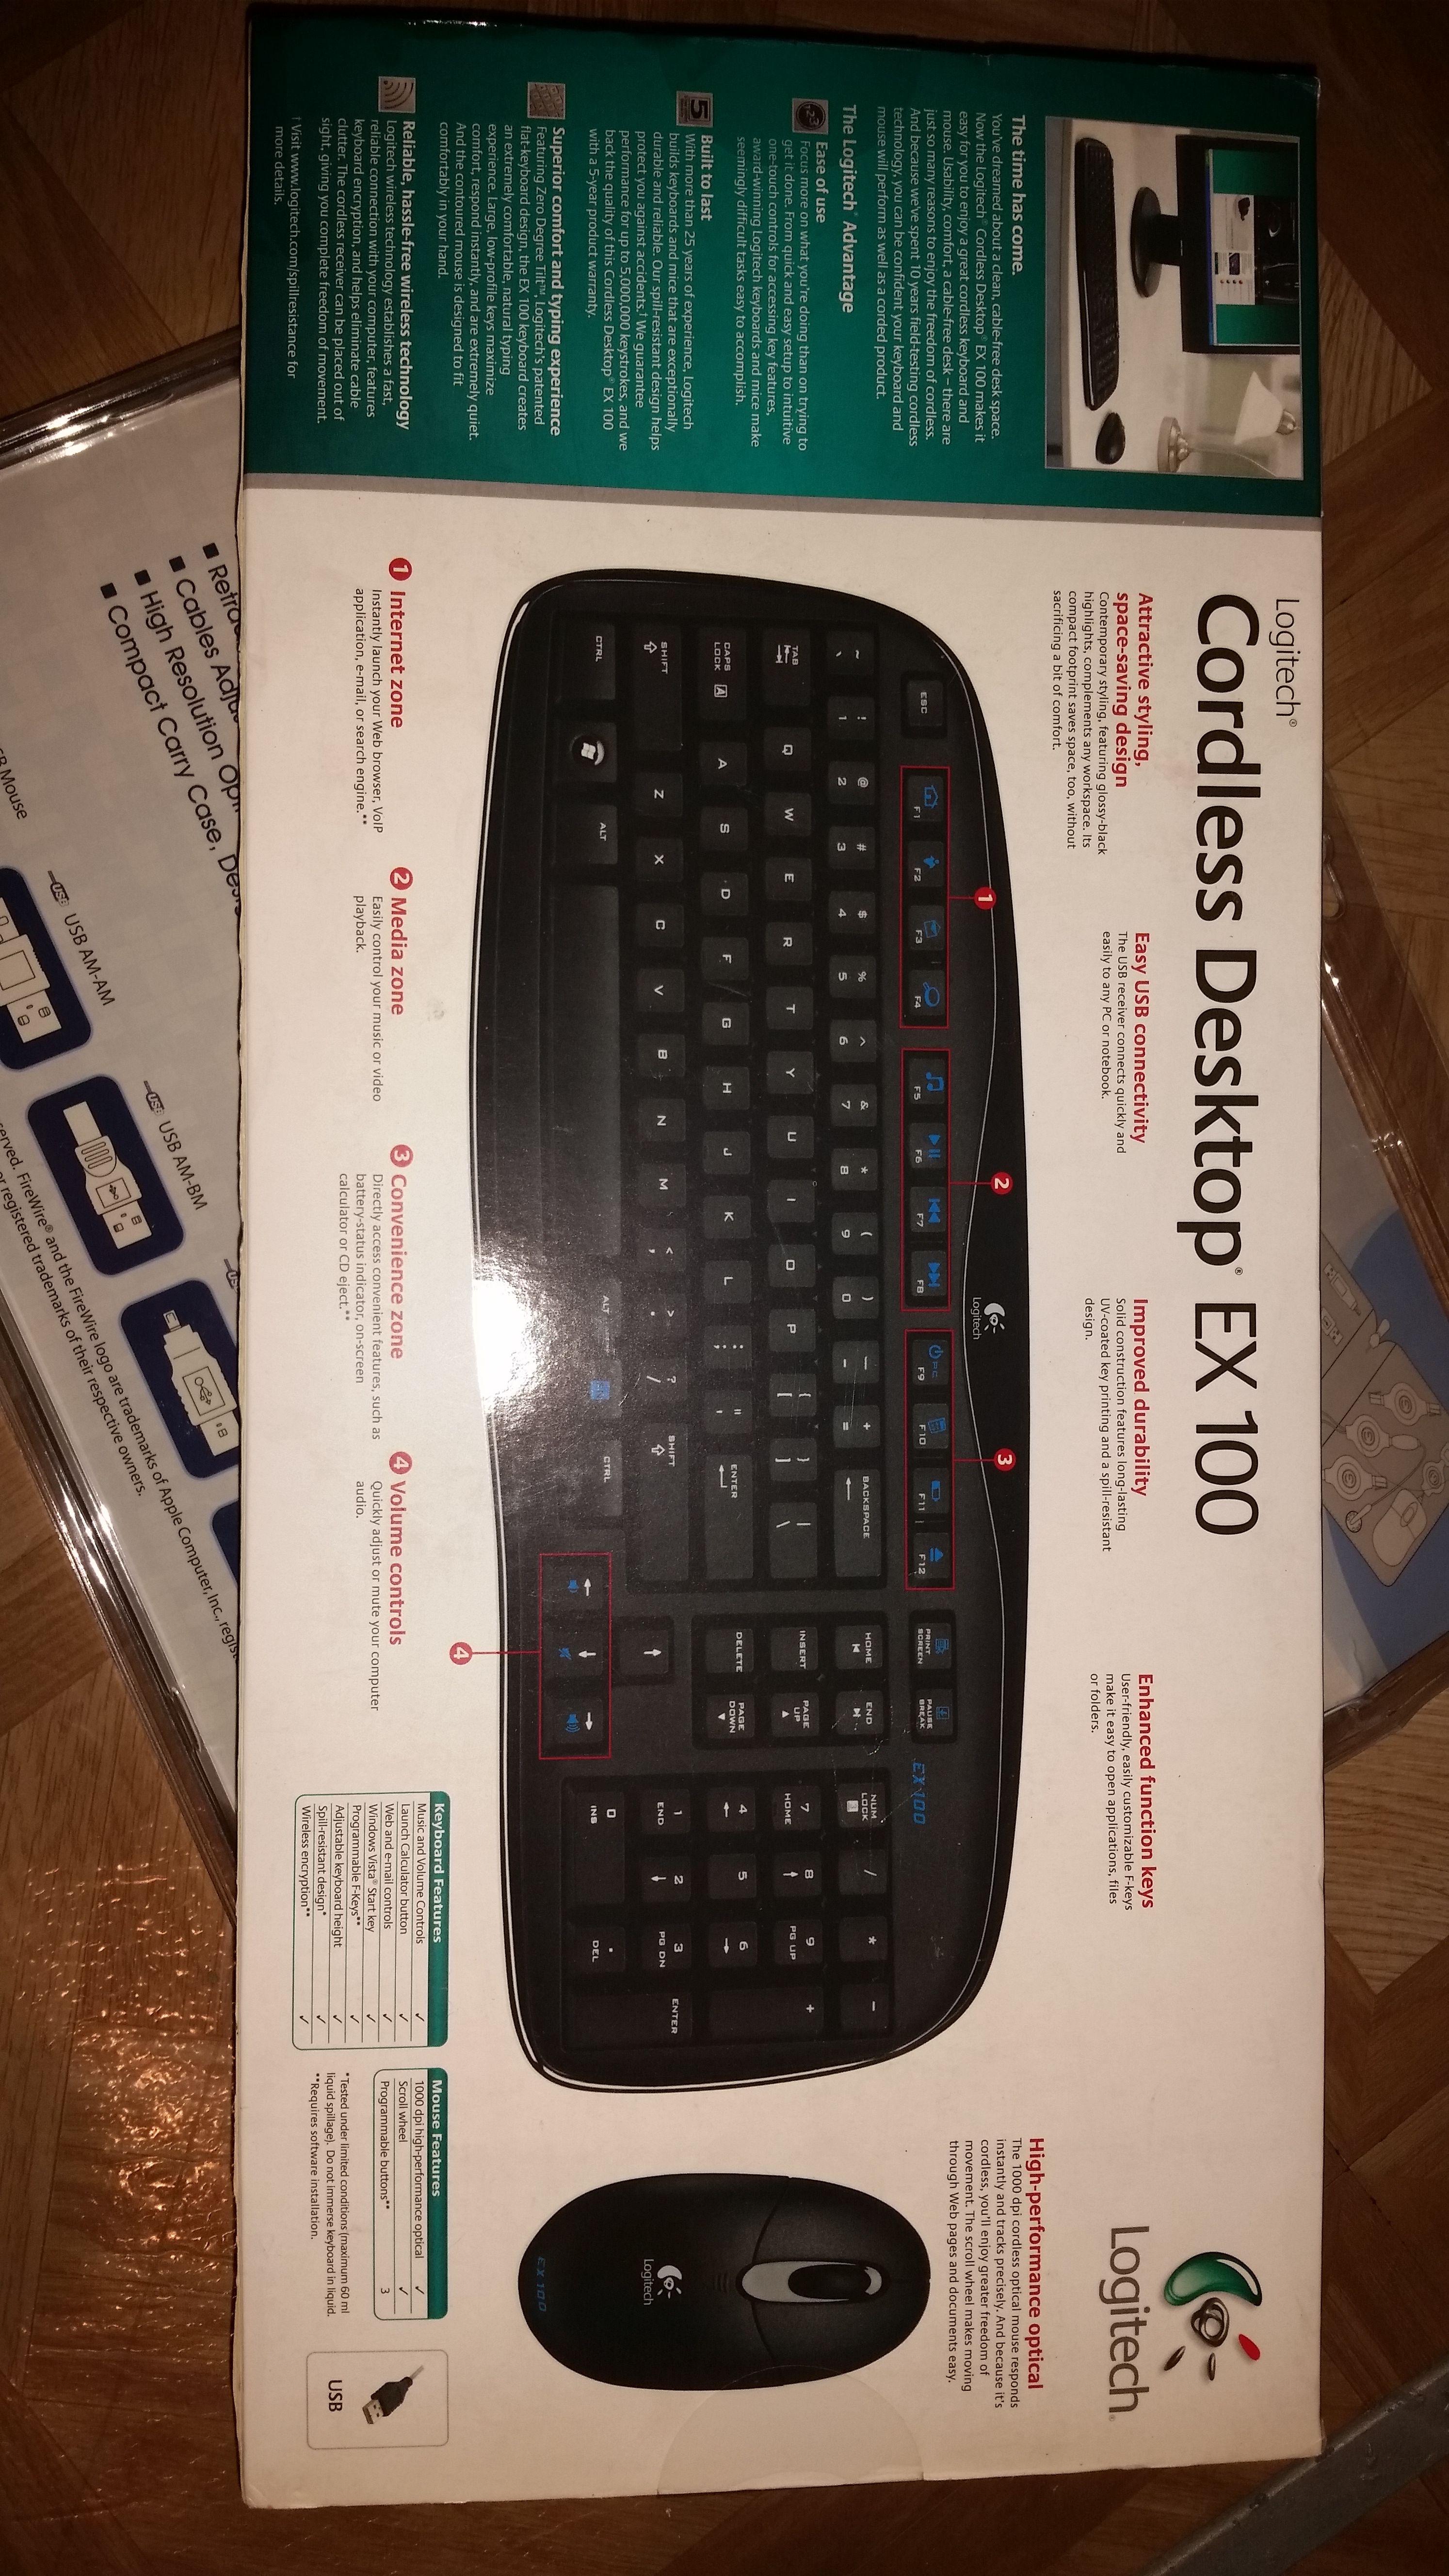 Logitech EX100. Keyboard and mouse. Brand new